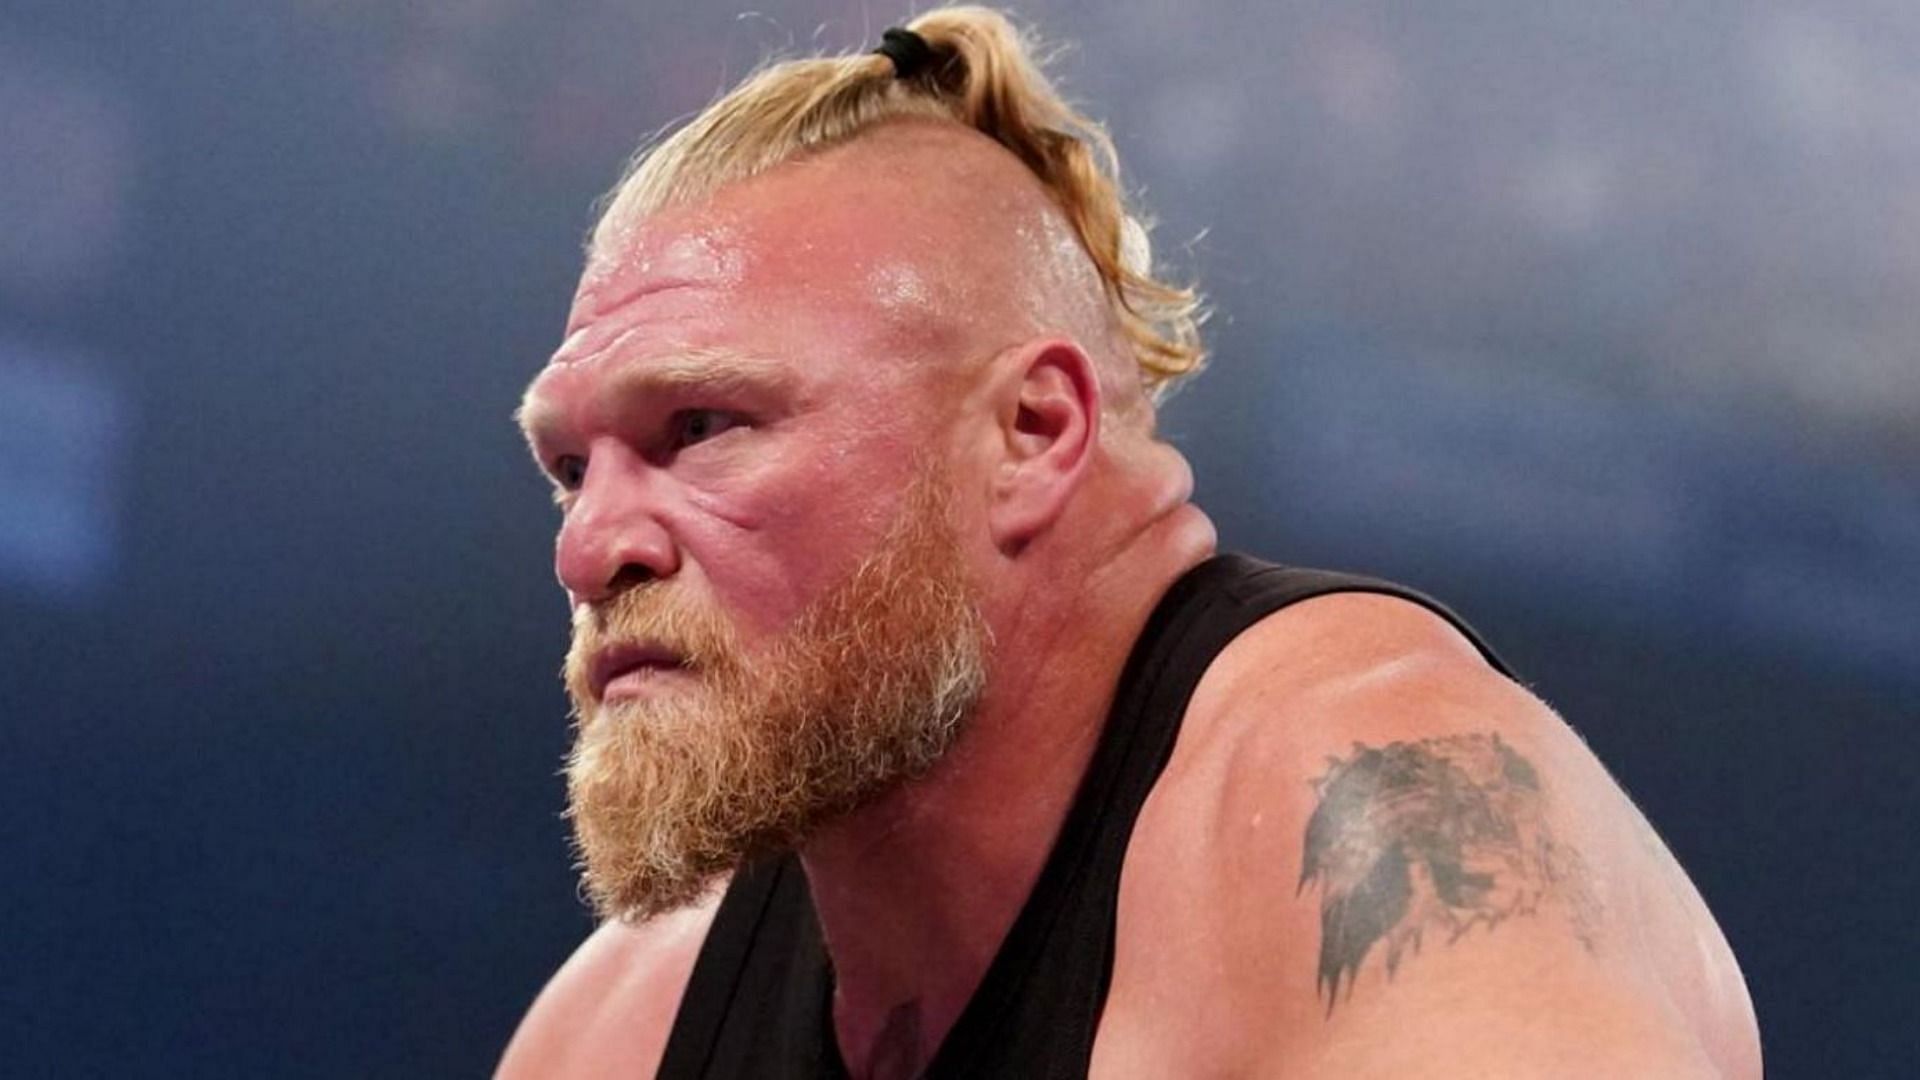 Could The Beast Incarnate&#039;s WWE title reign come to an end soon?